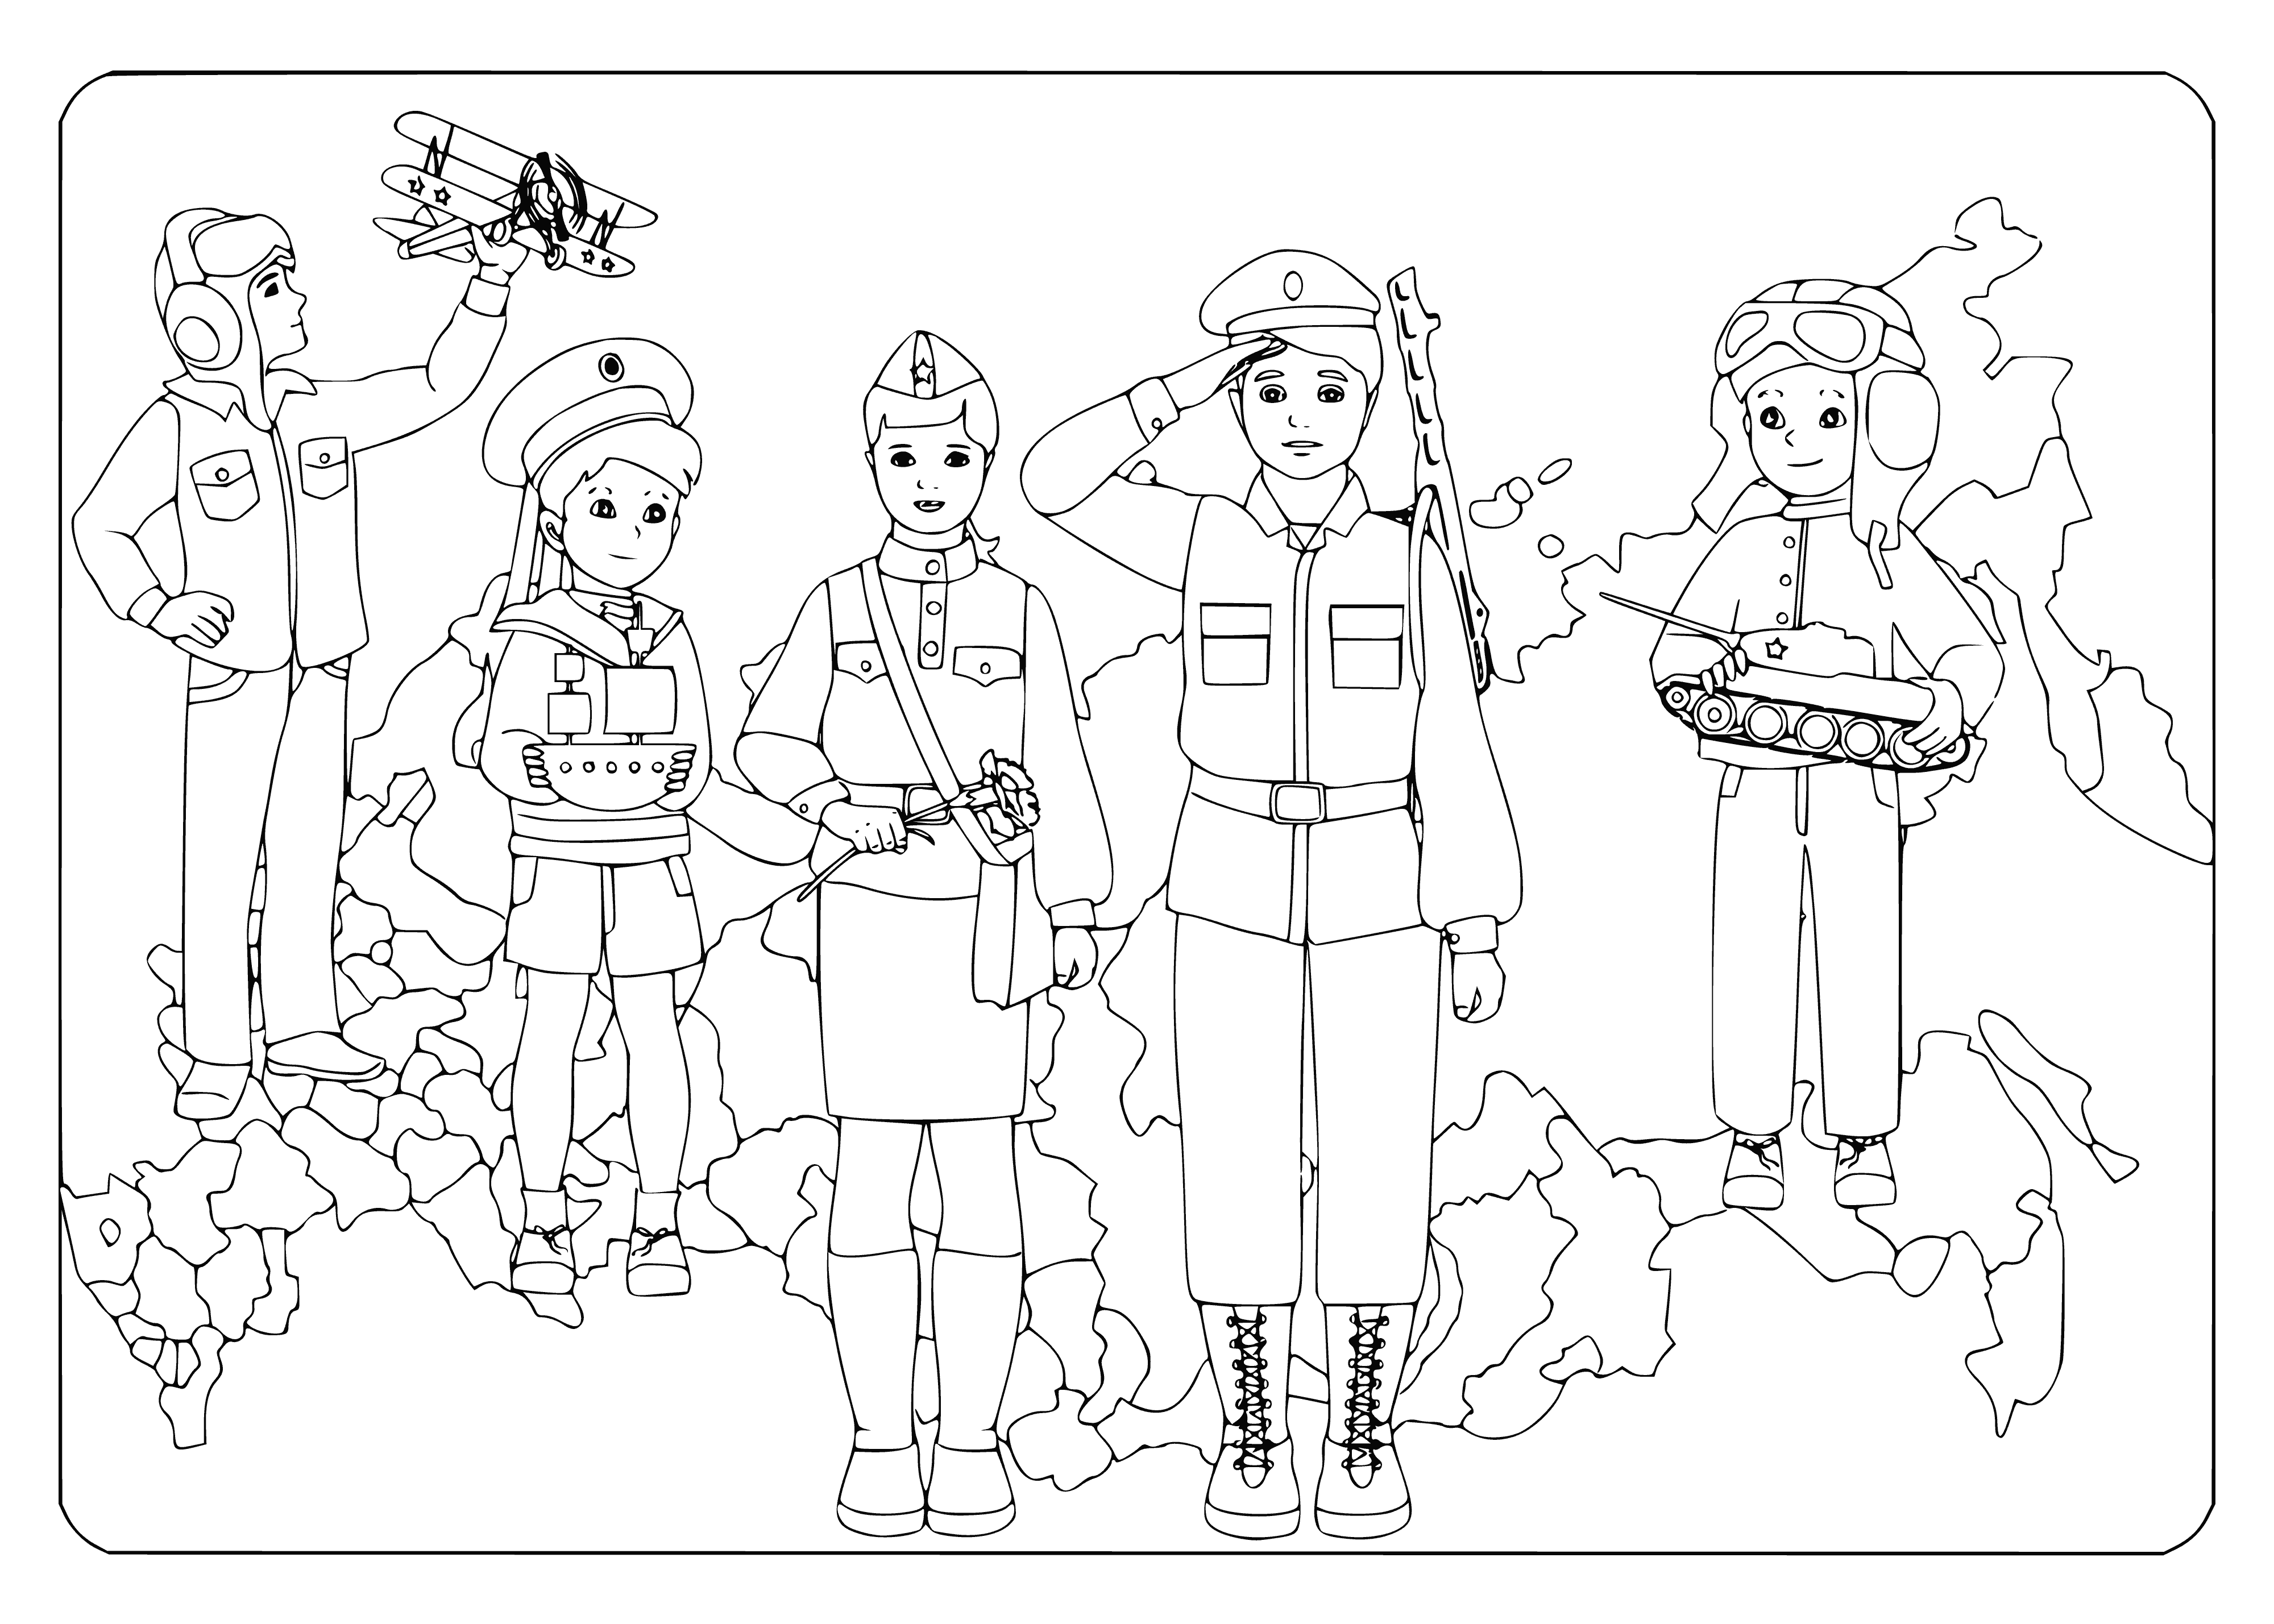 Victory grandchildren coloring page